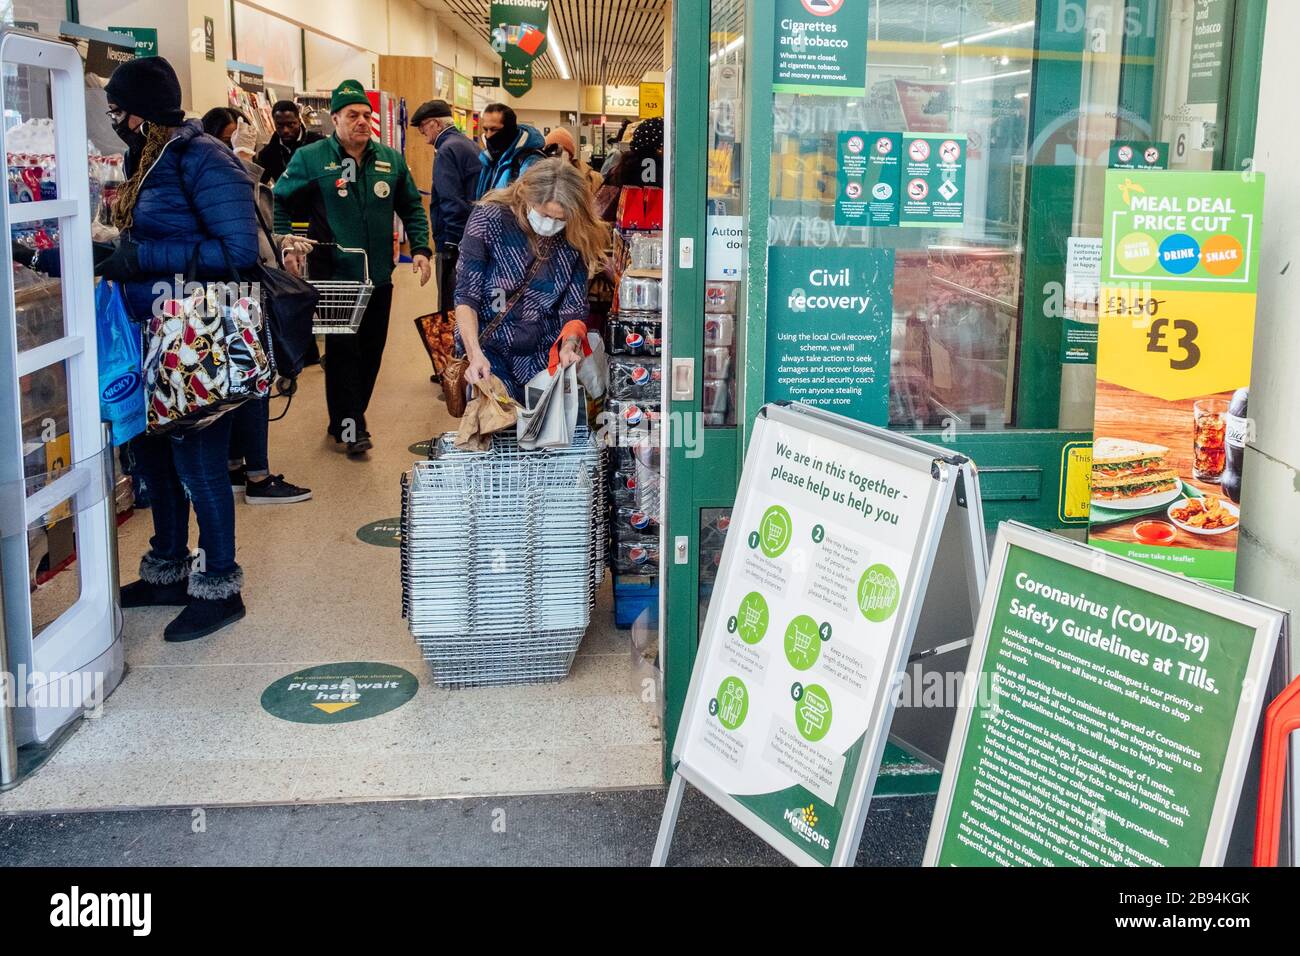 Camberwell, London, UK. 23rd March, 2020. Signs giving advice on Coronavirus and asking people to be considerate at Morrisons Supermarket.  A shopper wears a facemask to help prevent the risk of infection from Coronavirus. Credit: Tom Leighton/Alamy Live News Stock Photo